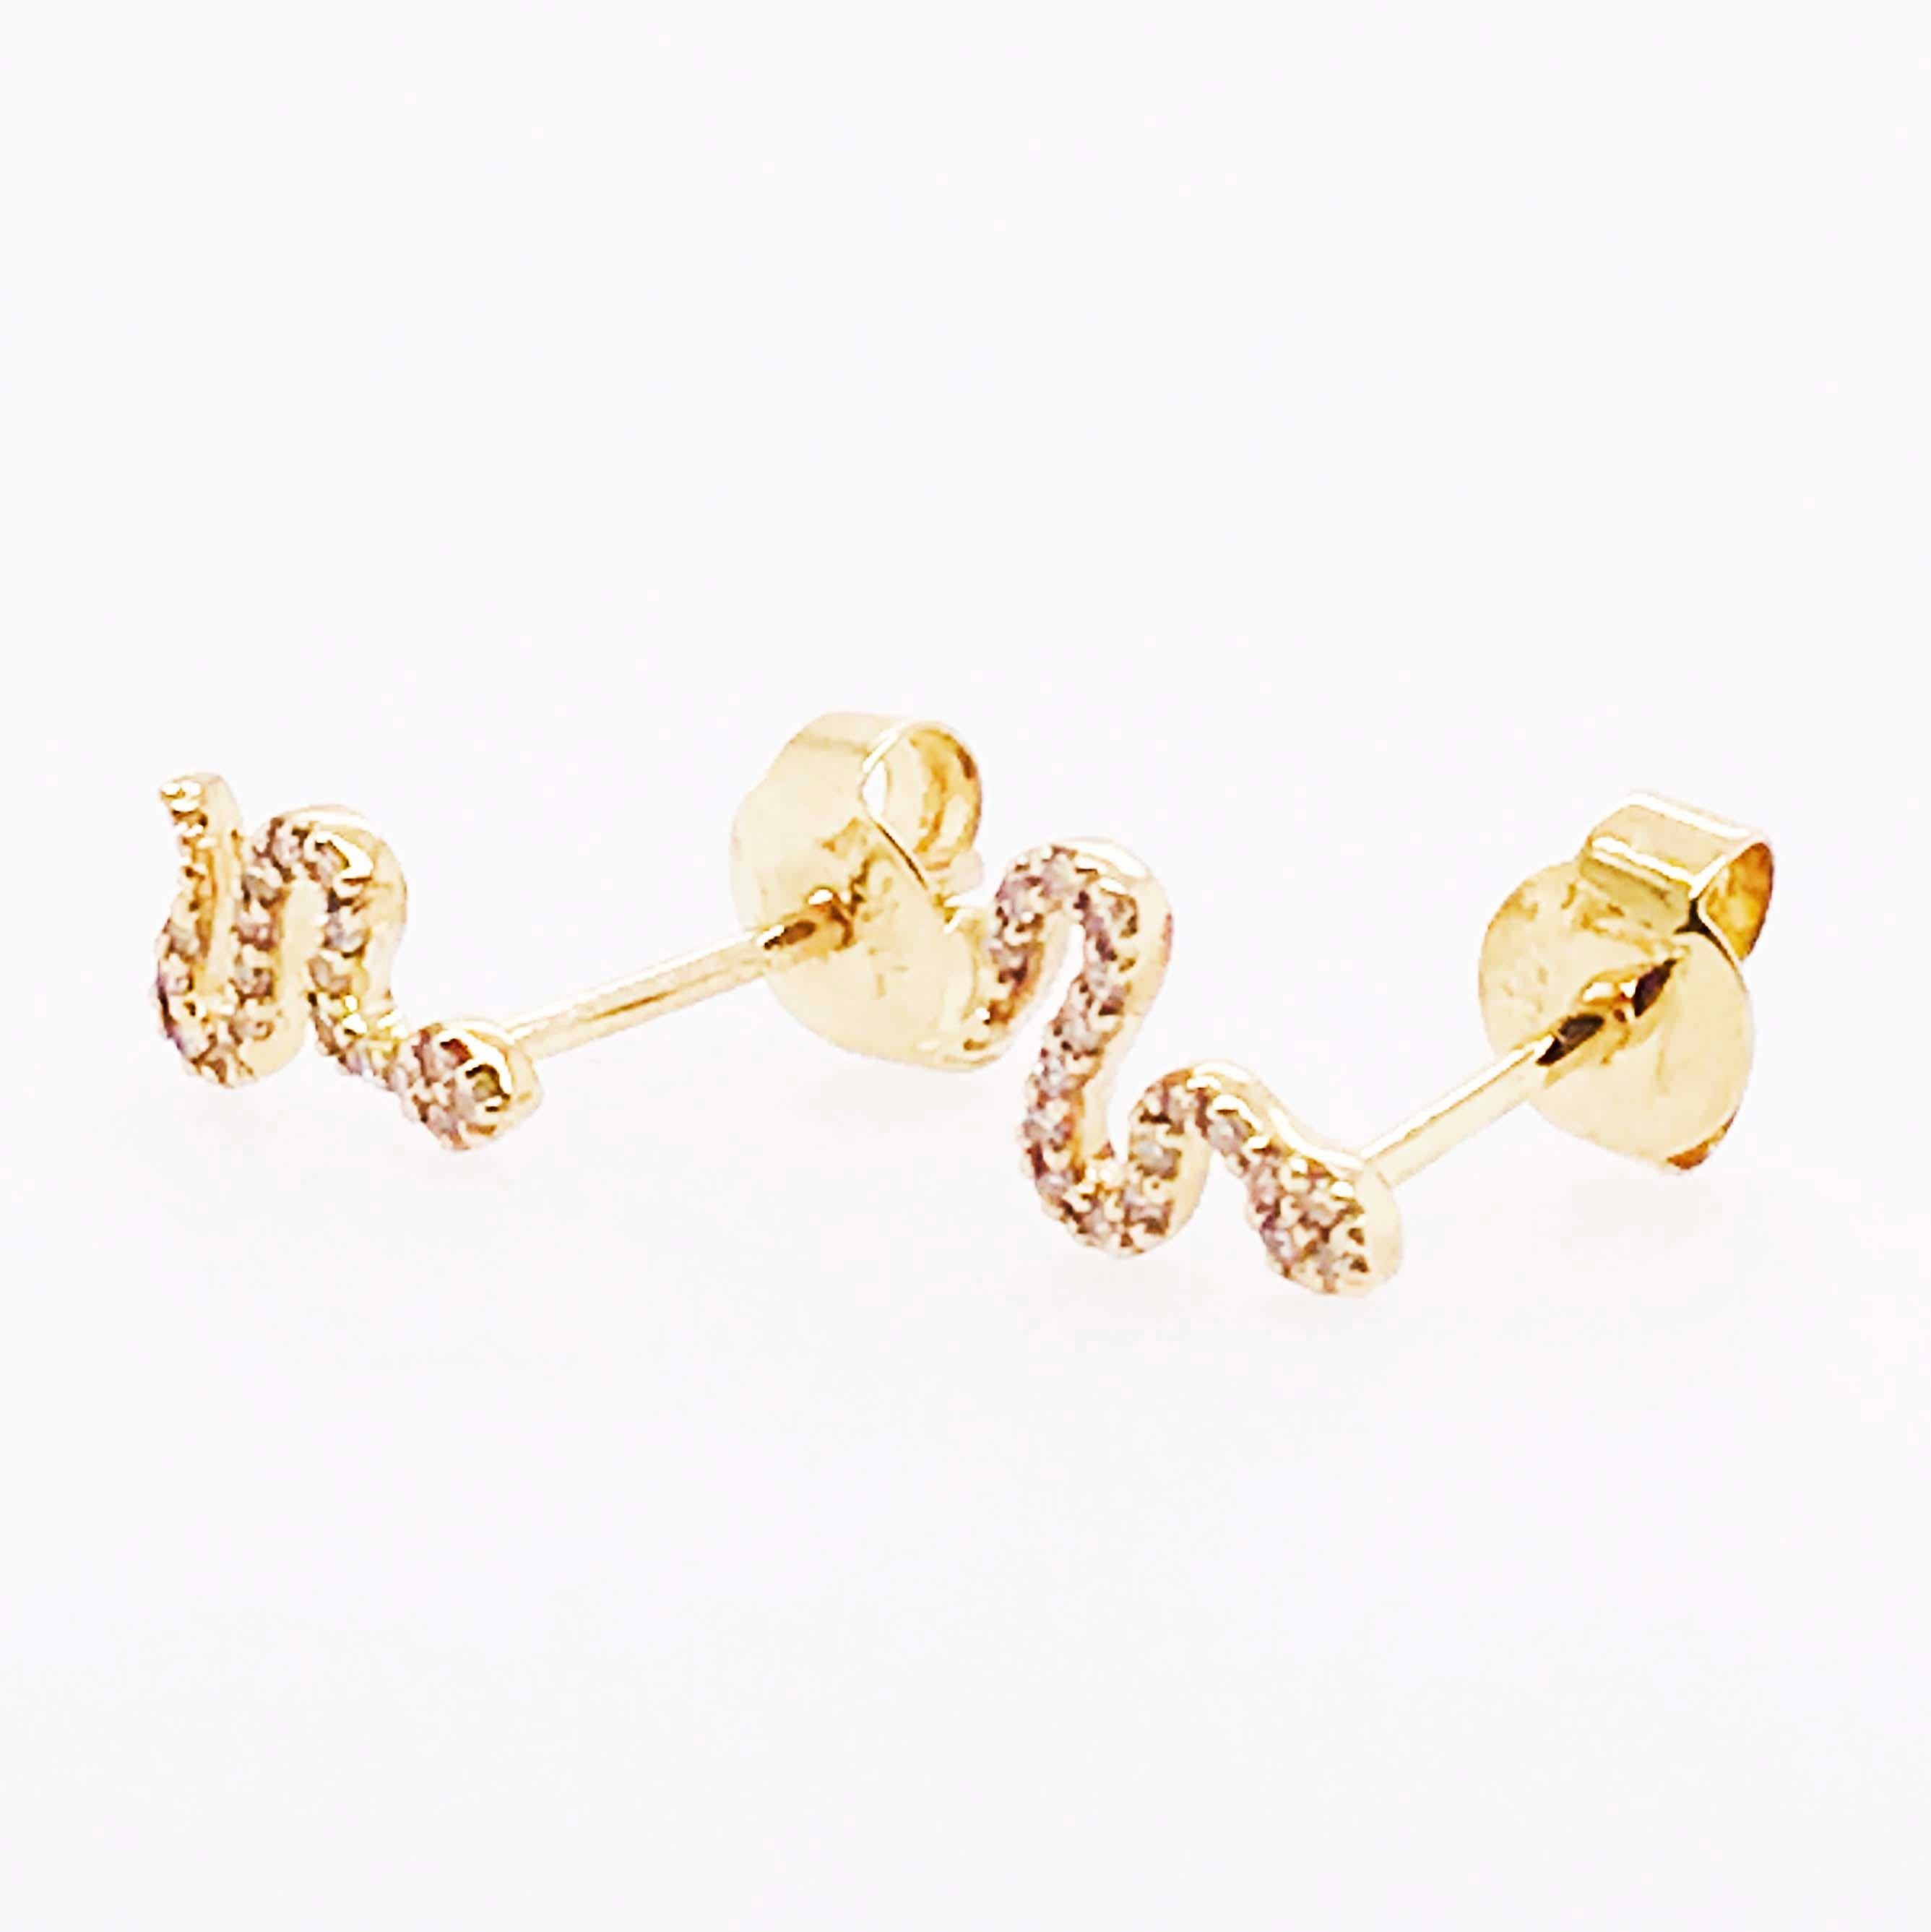 Round Cut Diamond Snake Earrings, Pave Diamond Serpent Earring Studs in Yellow Gold